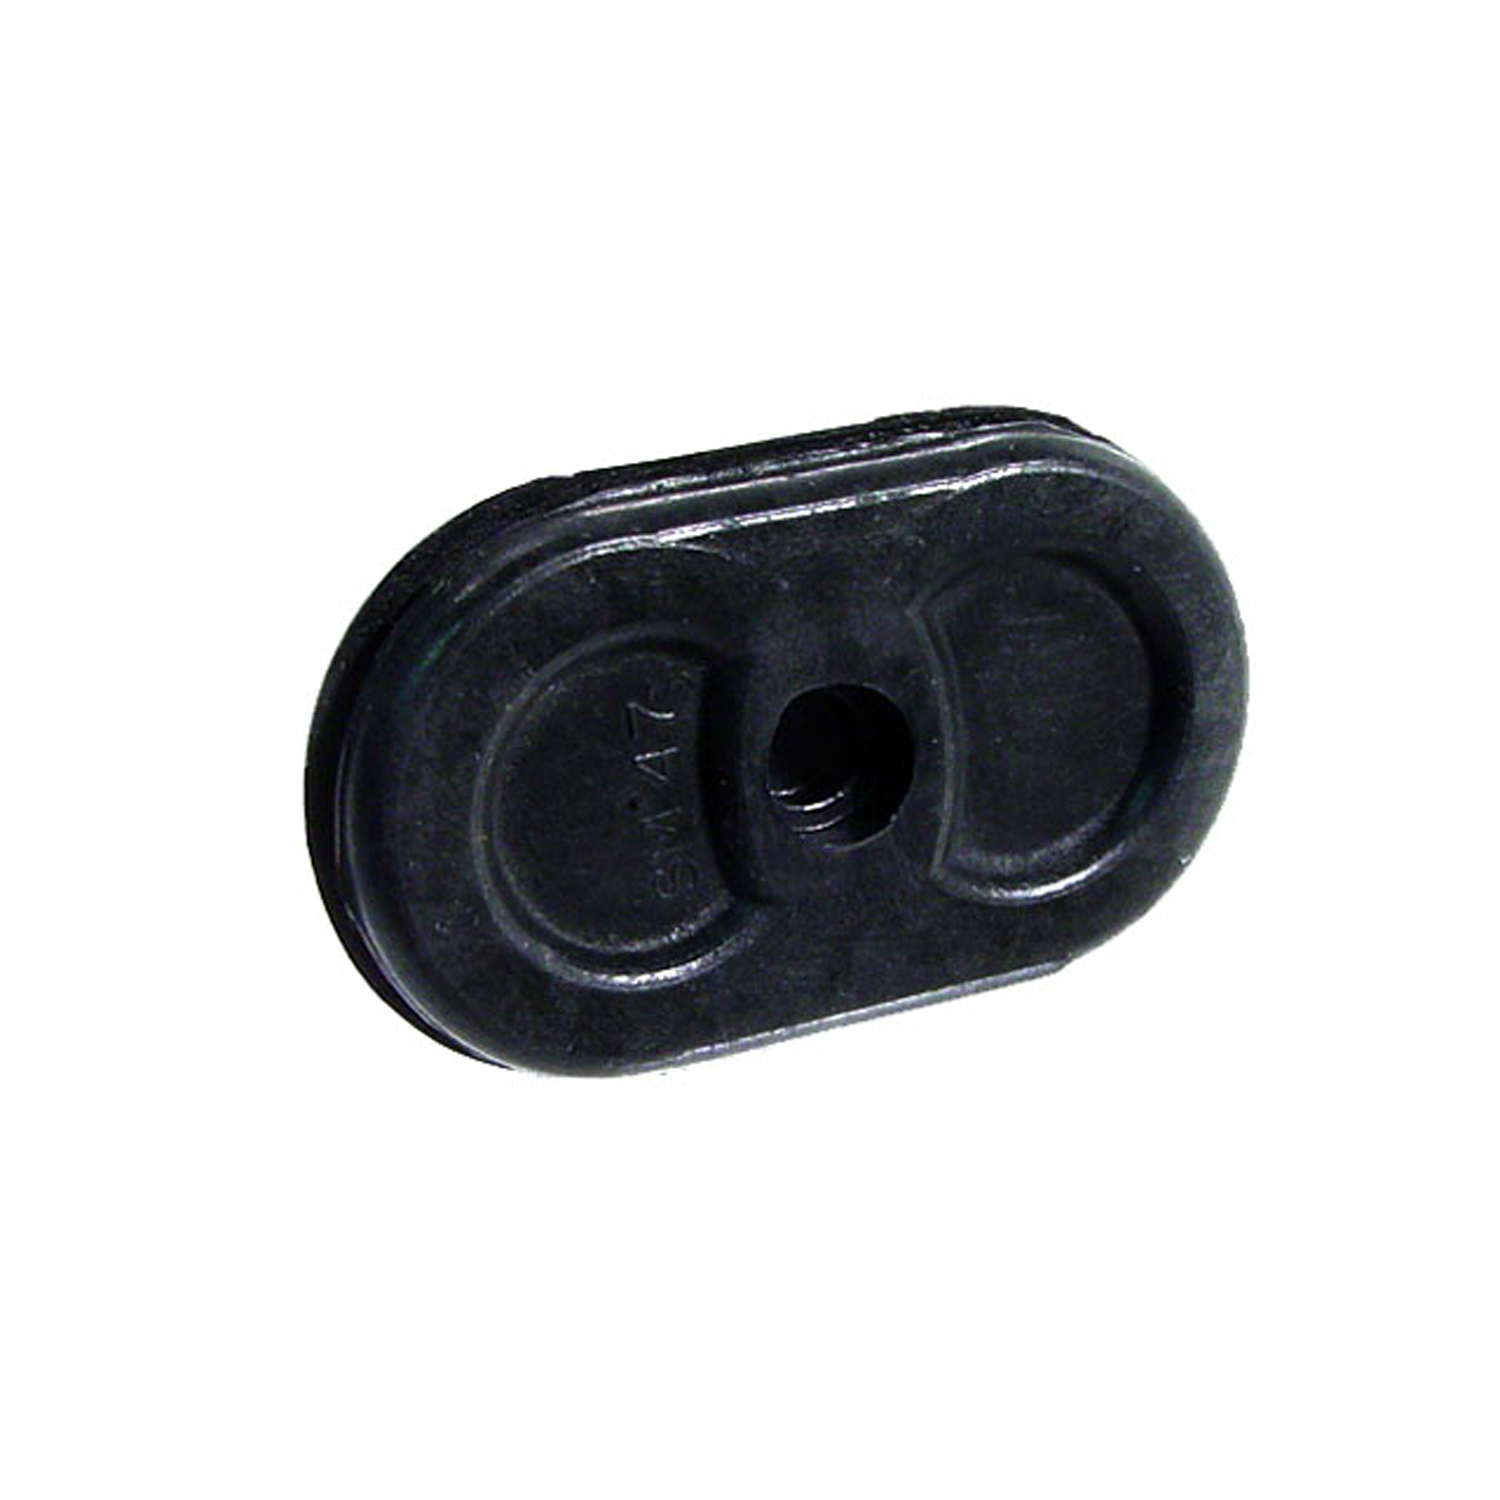 1941 Cadillac Series 62 Speedometer Cable Firewall Grommet.  Fits 1-7/8 long hole-SM 47